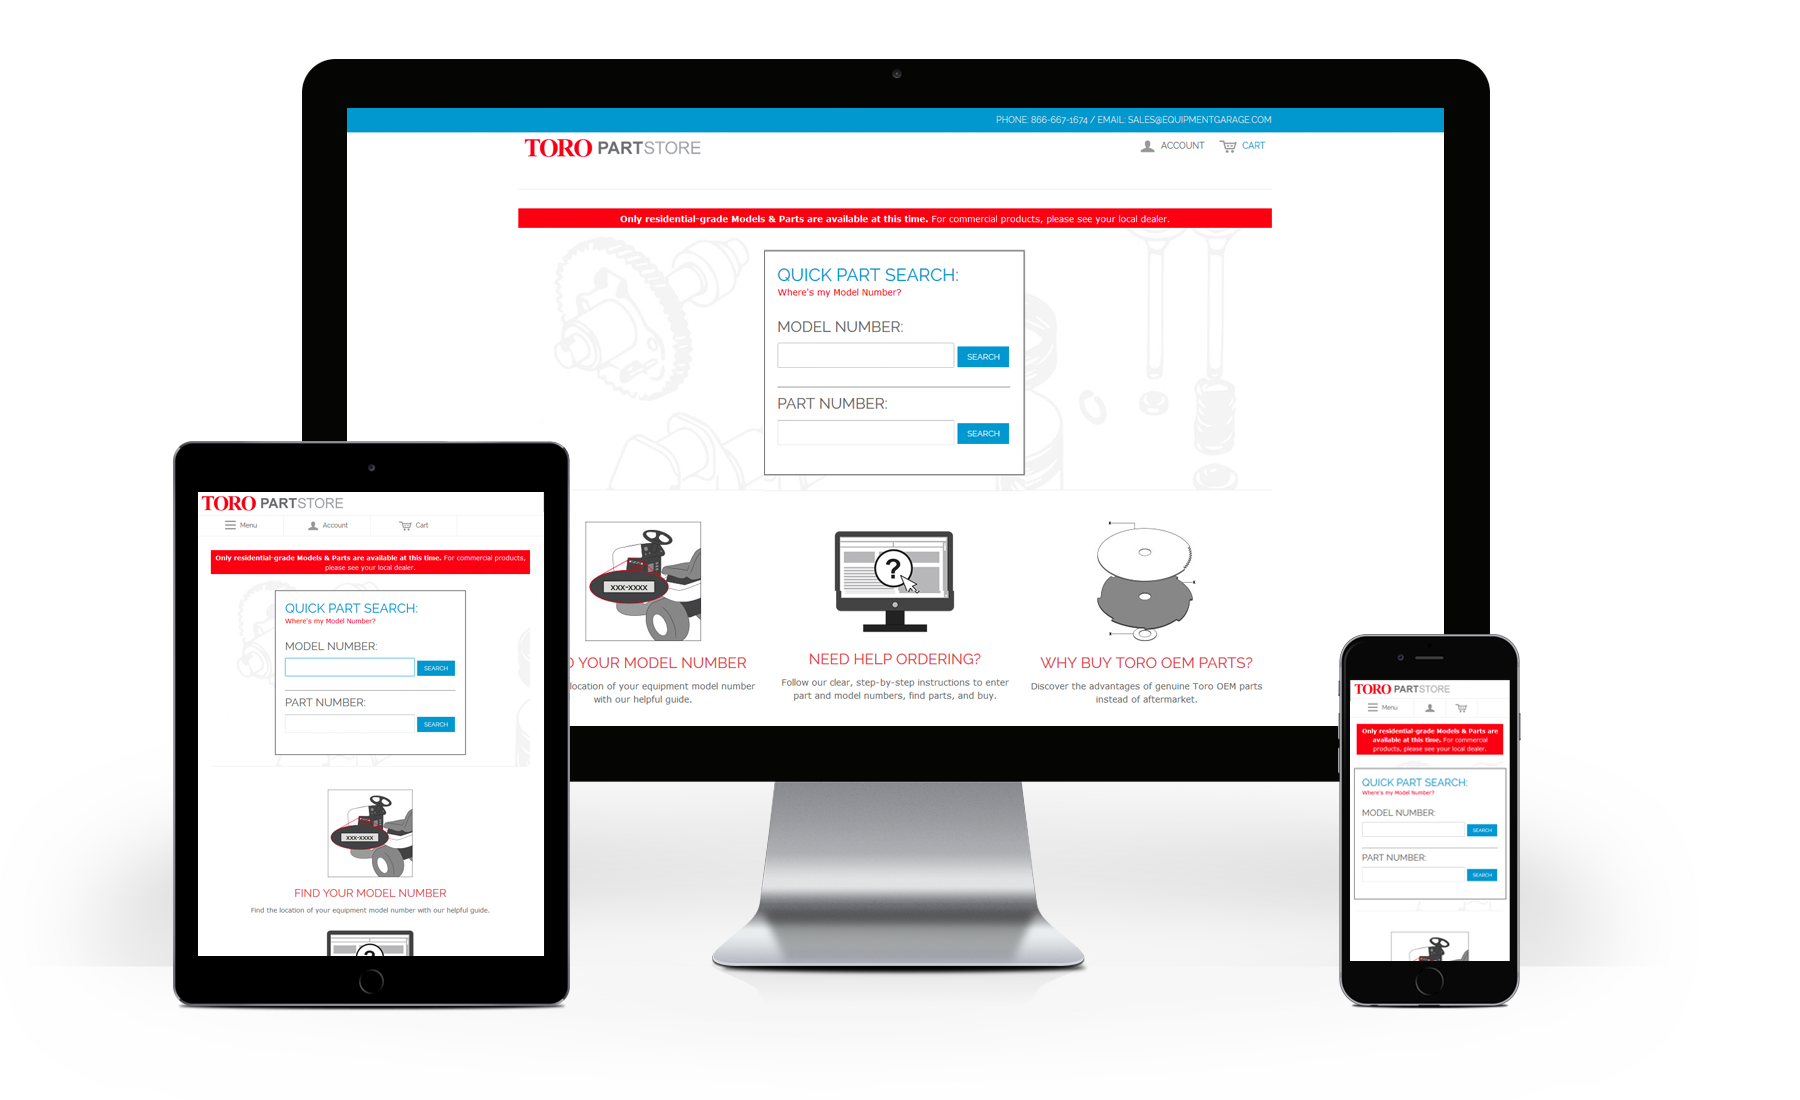 Desktop, tablet, and mobile views of the Toro Part Stores website